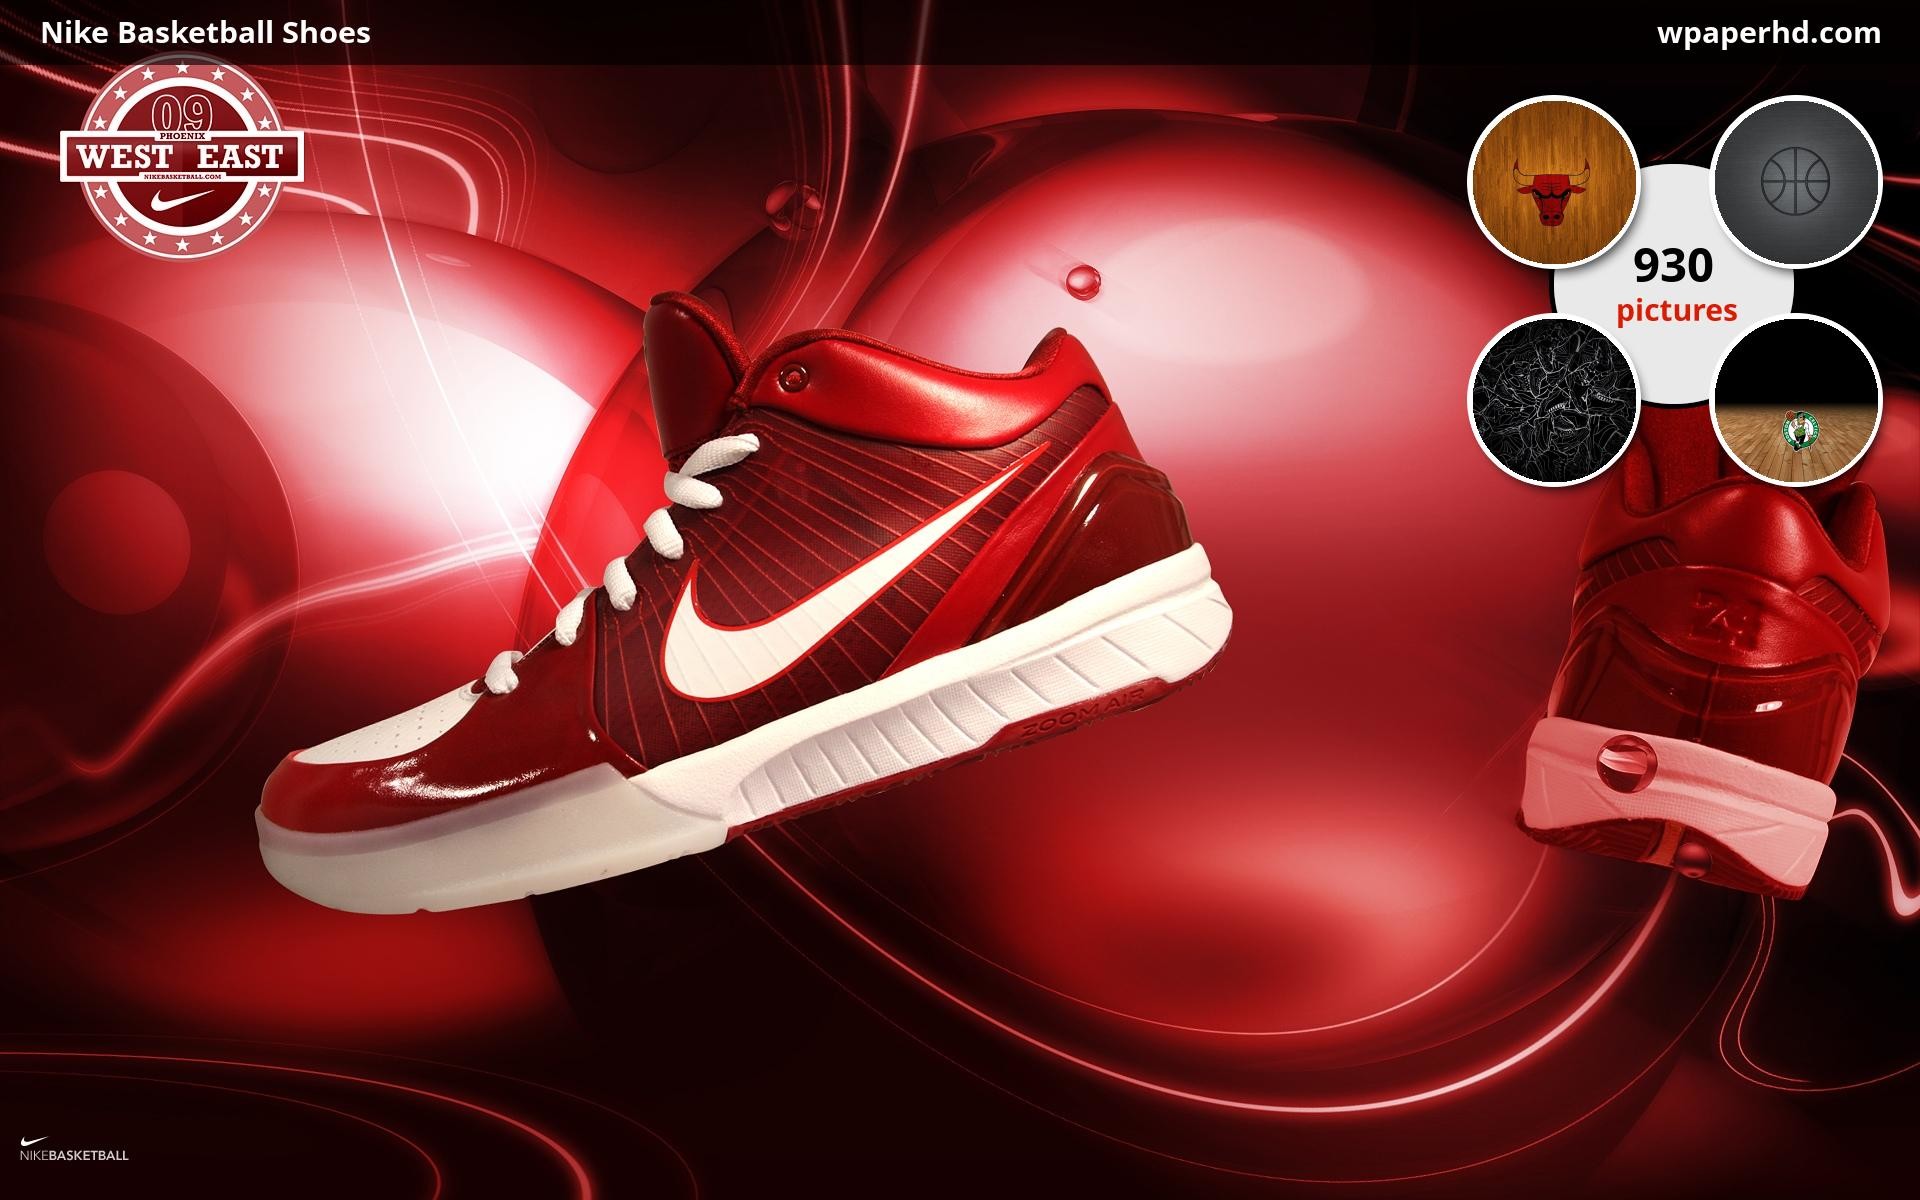 1920x1200 You are on page with Nike Basketball Shoes wallpaper, where you can  download this picture in Original size and ...